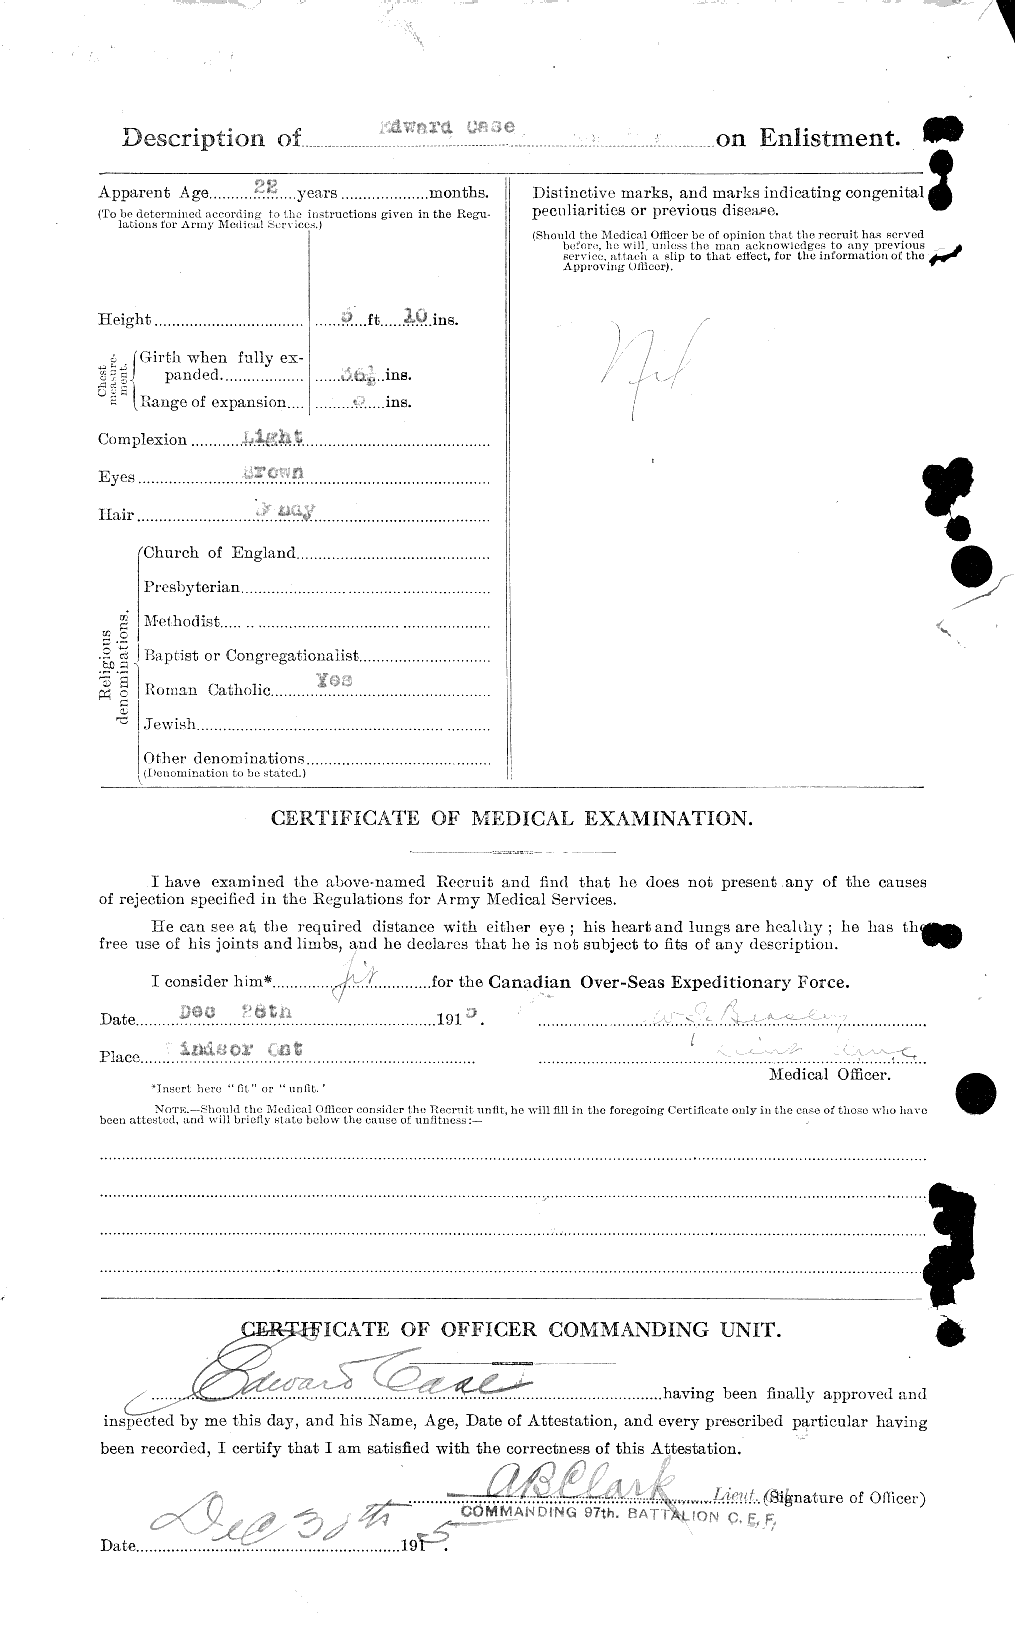 Personnel Records of the First World War - CEF 012694b